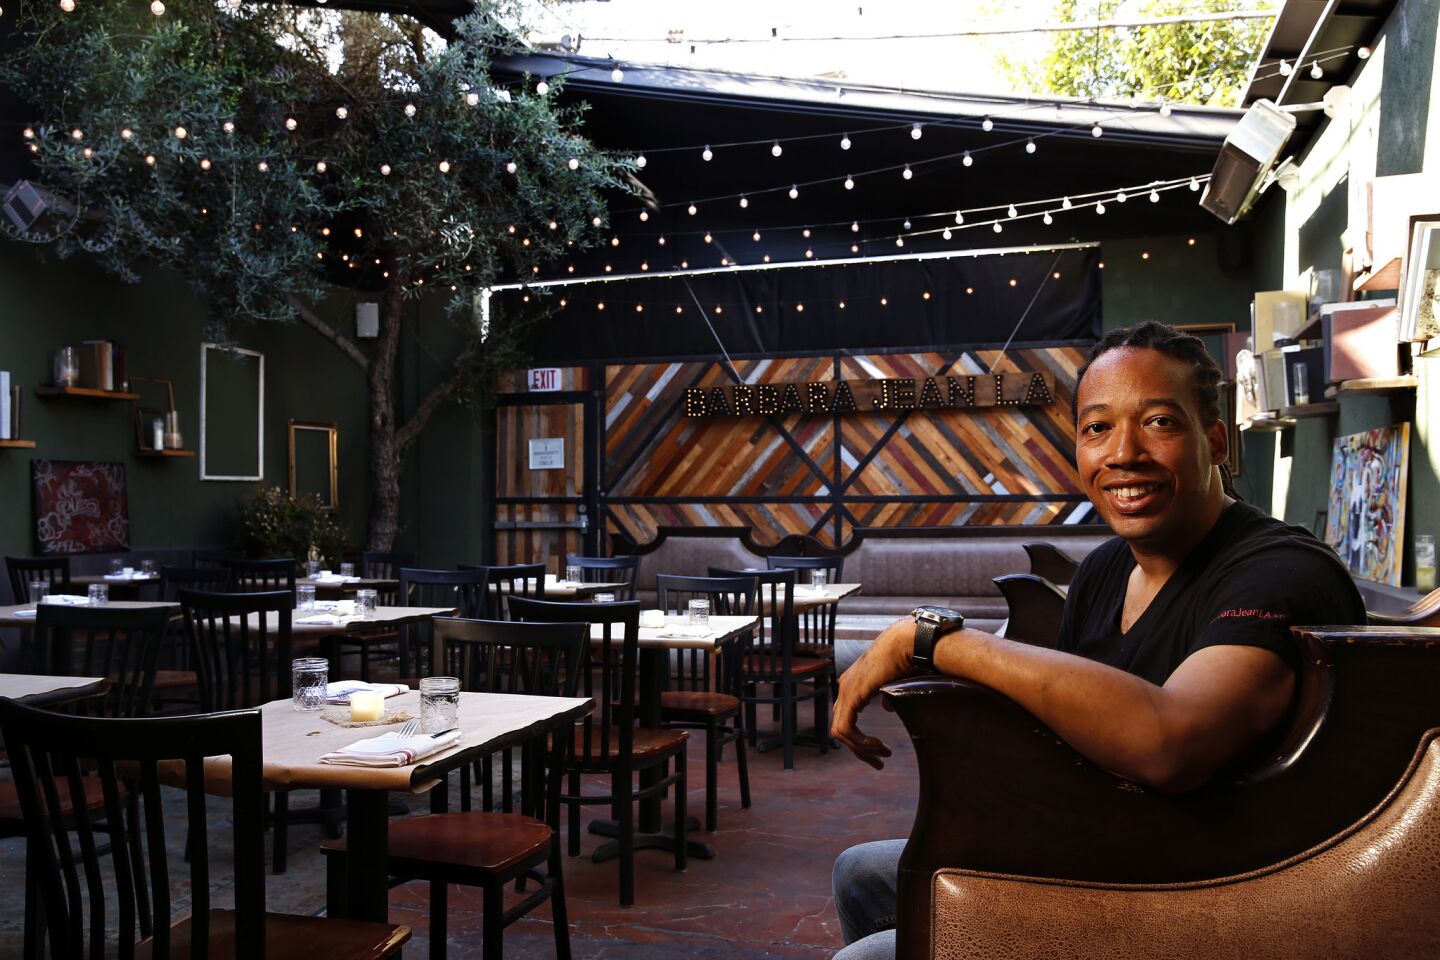 Chef Jason Fullilove built a following through a series of pop-ups and residencies. Now he has a place of his own. He calls it Barbara Jean, after his mother. The fare, he says, is “soul food” — vaguely Southern comfort food made with fine-dining technique.